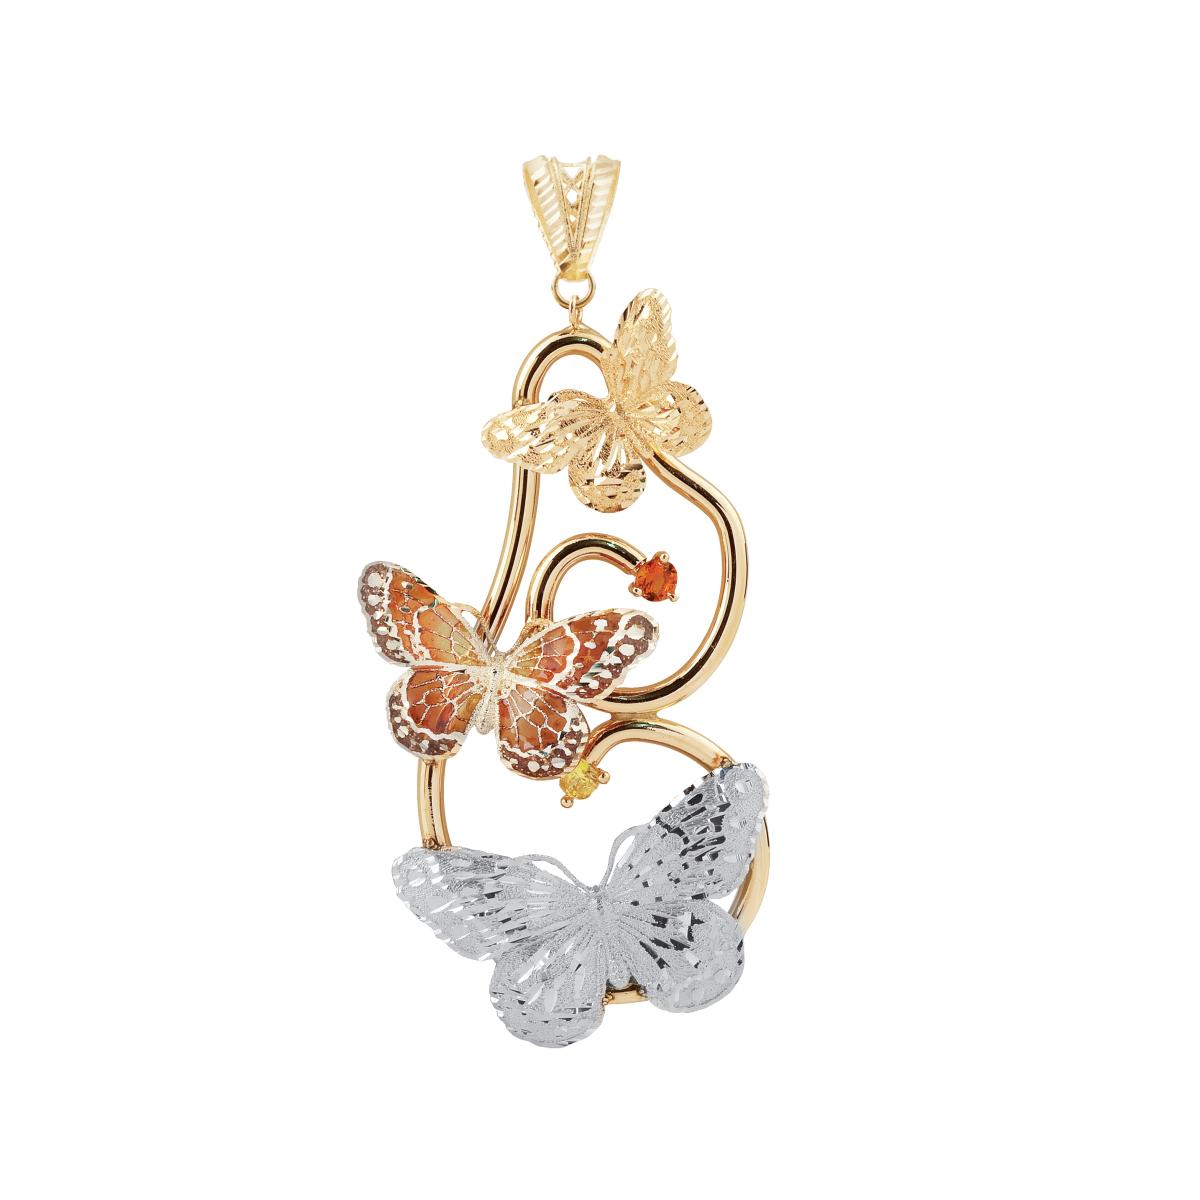 3 Butterflies pendant in two-tone 18kt gold, cathedral enamel and citrine stones - DCA251-MN